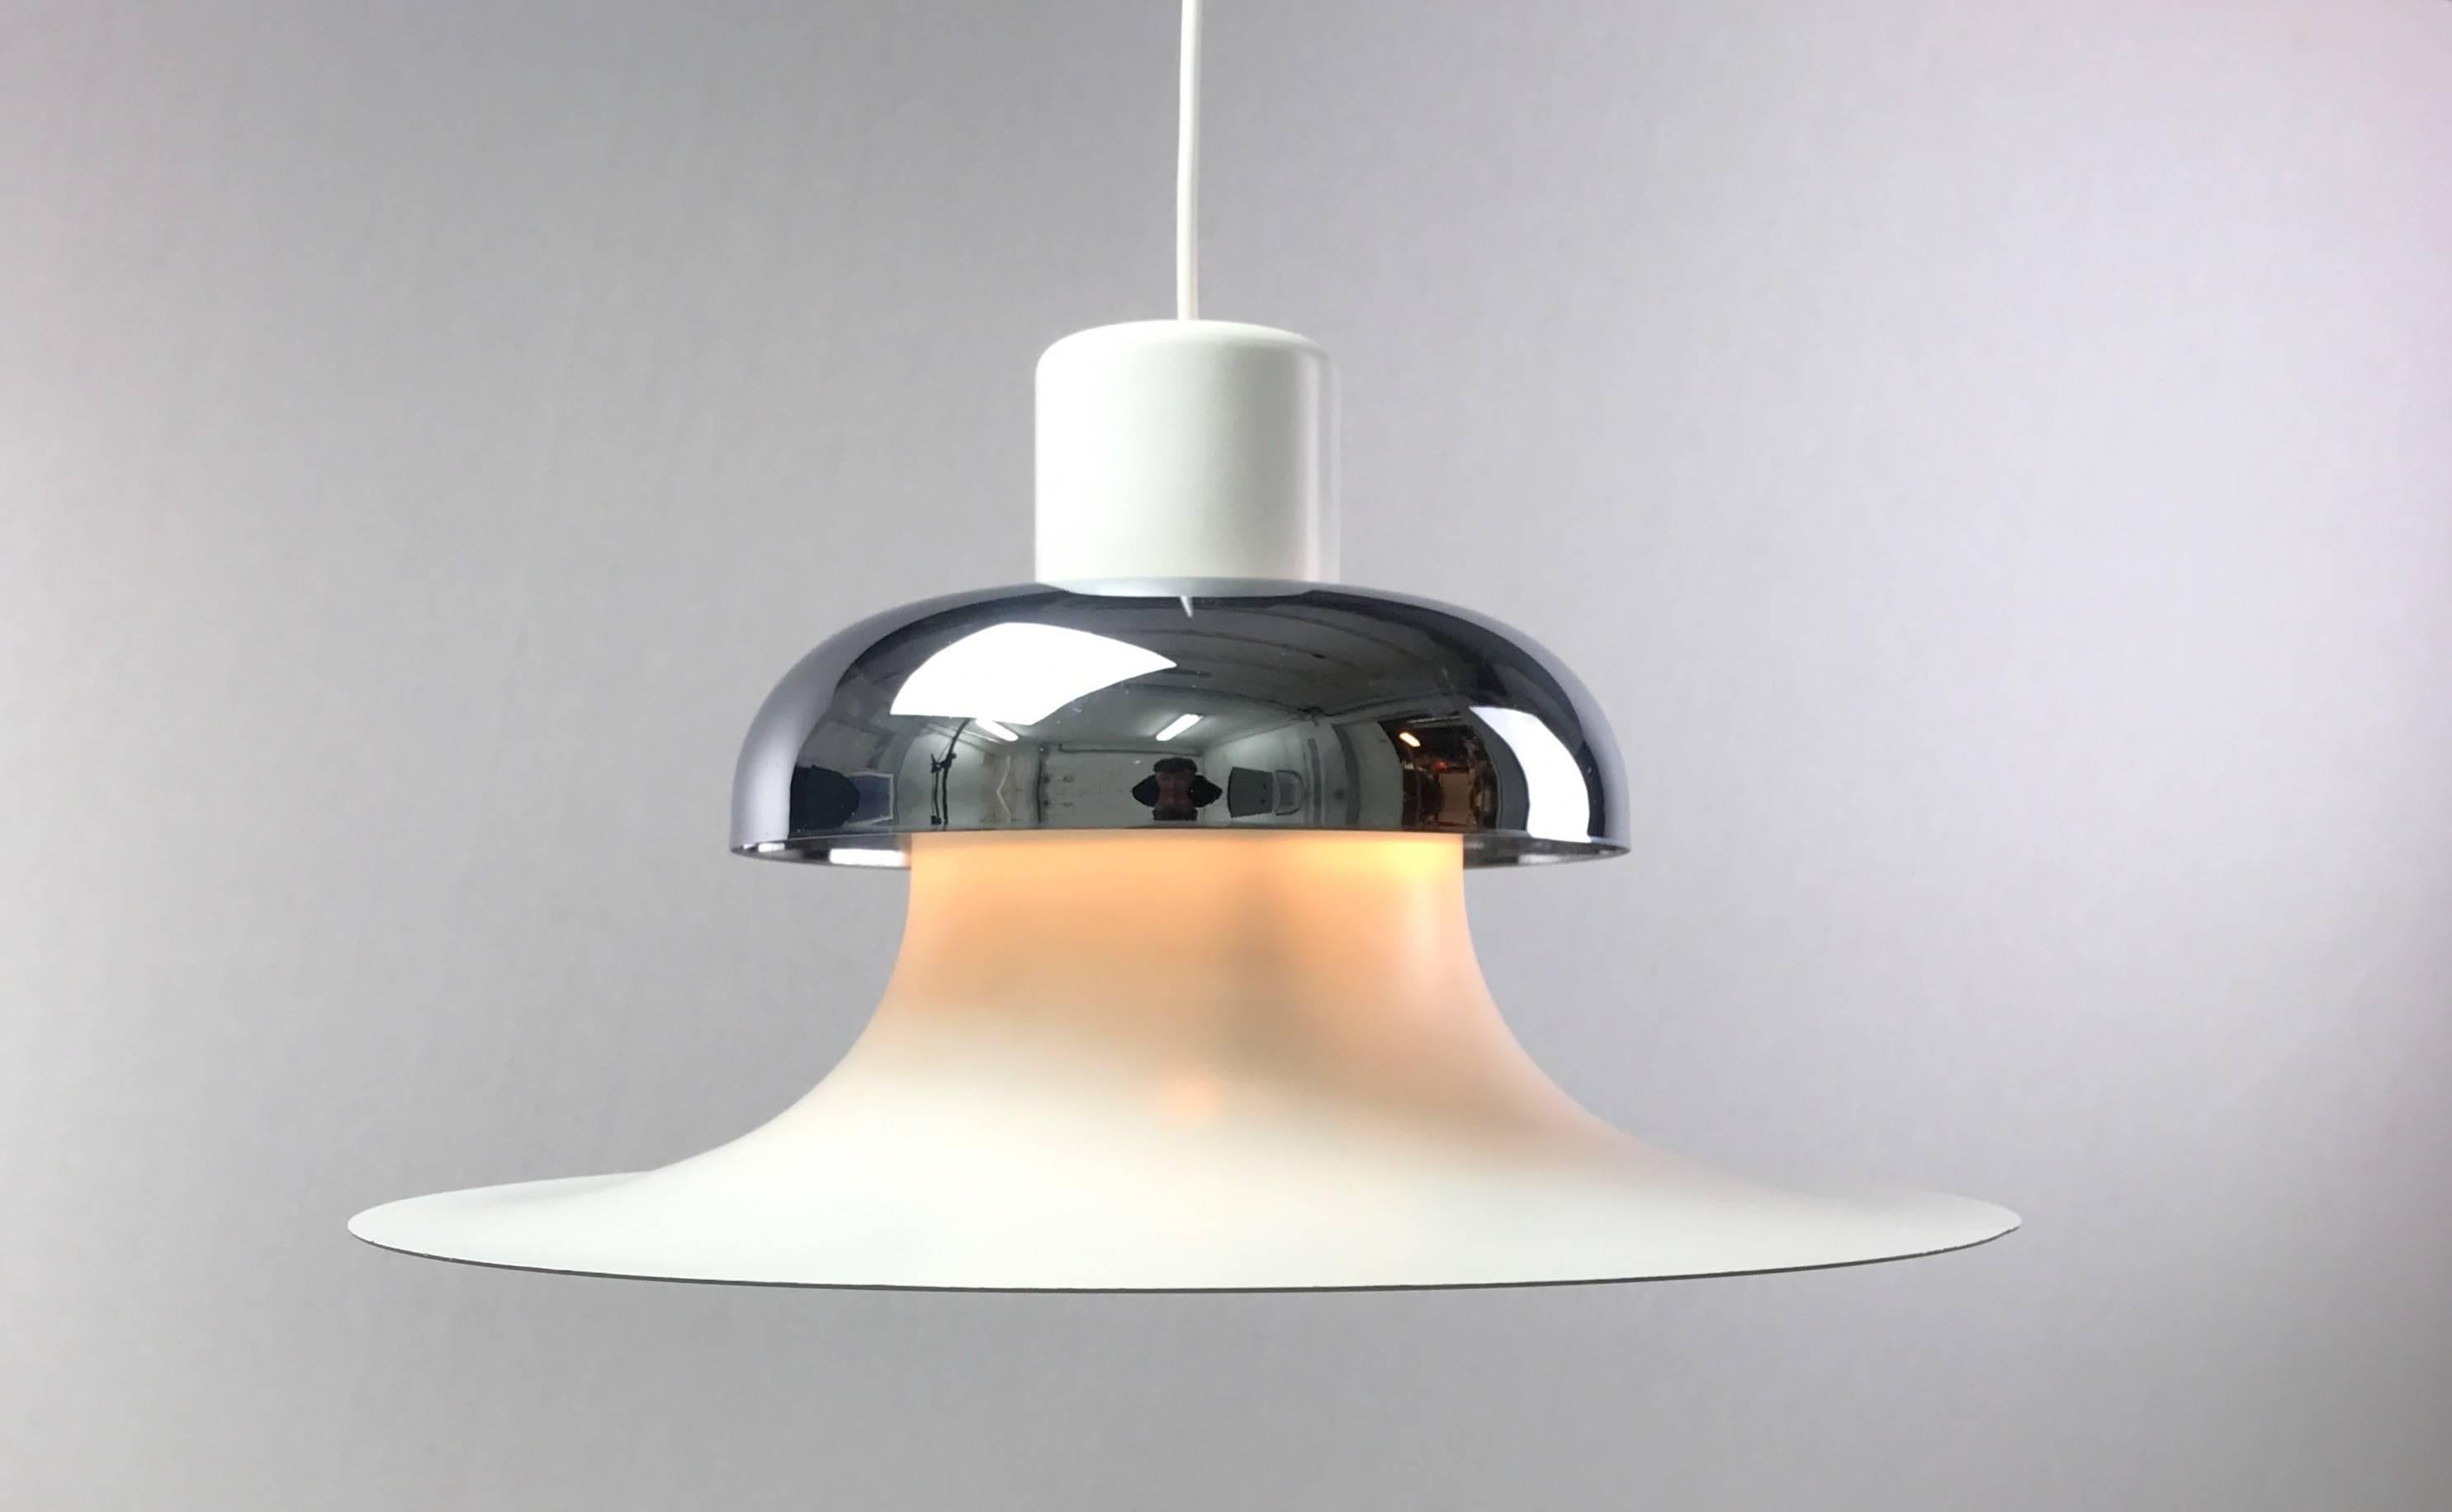 Classic Nordic design by Andreas Hansen in 1973 for Louis Poulsen.

The lamp is made of quality white lacquered steel with a polished chrome shade.

The trumpet shape and the divided shades give an amazing light - an indirect light